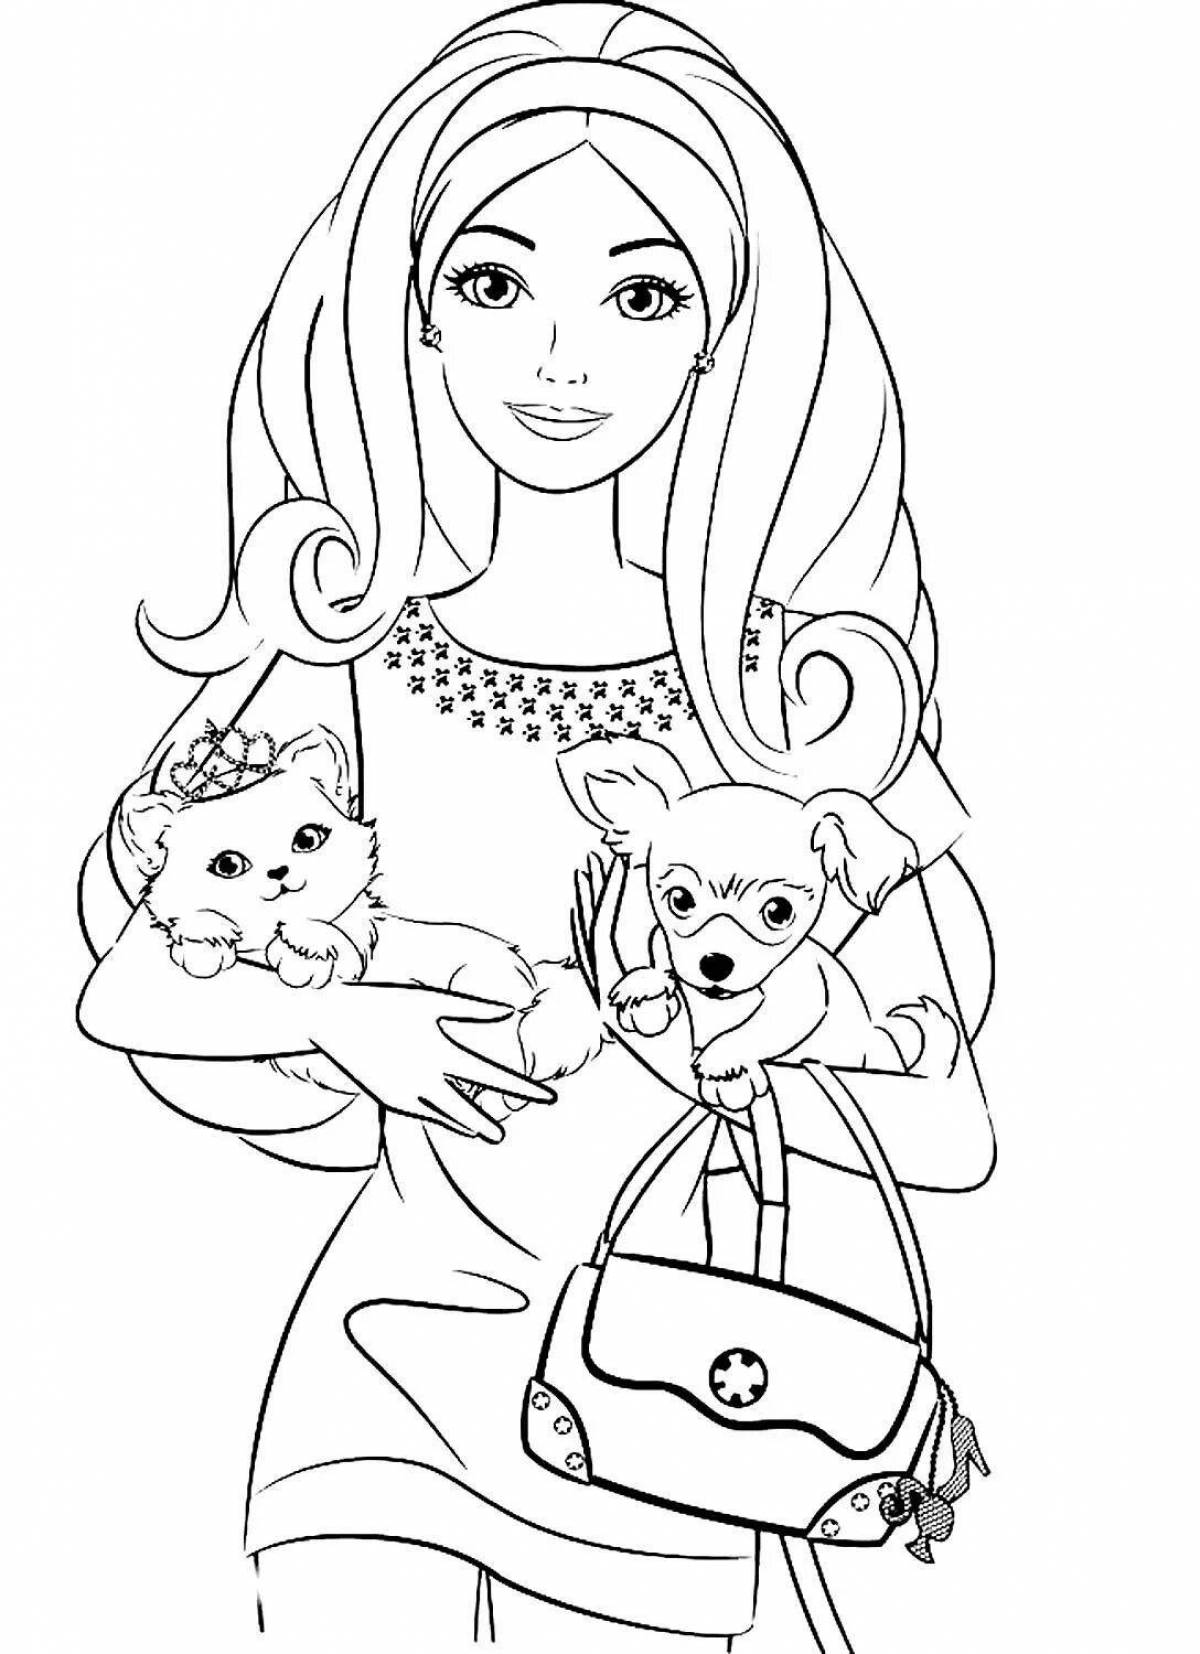 Exotic fashion doll coloring book